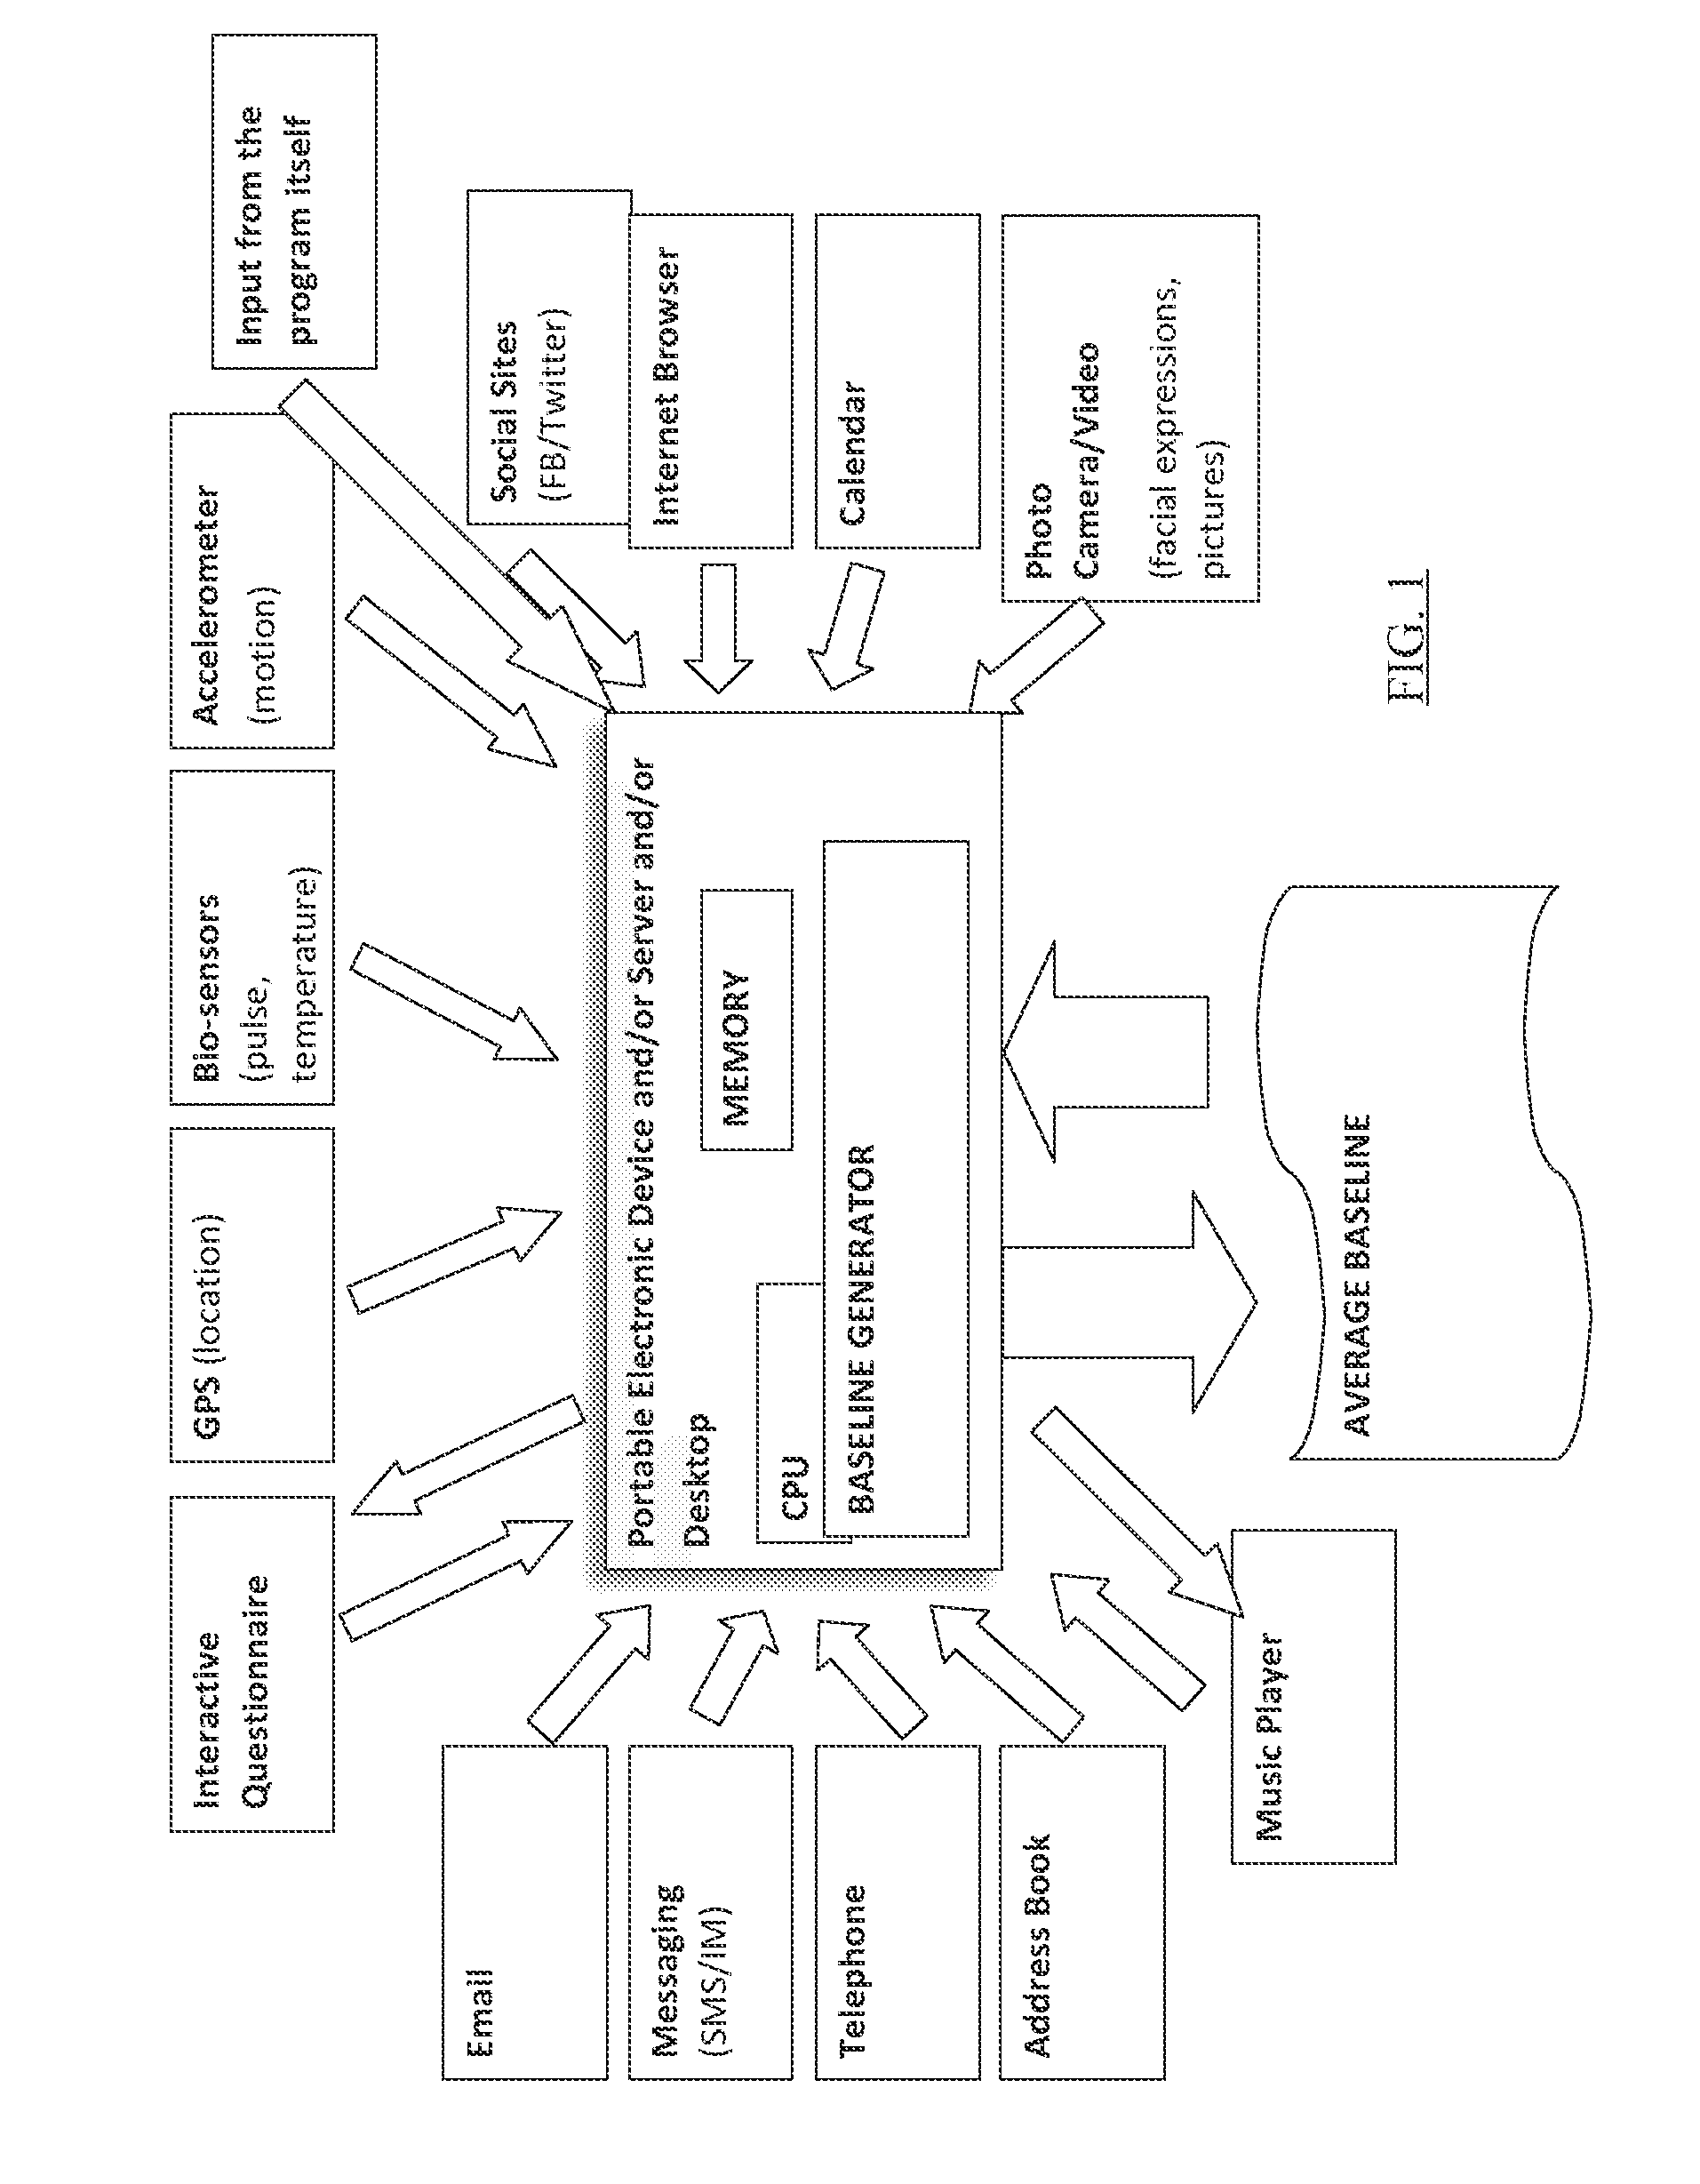 Emotion recognition system and method for assessing, monitoring, predicting and broadcasting a user's emotive state